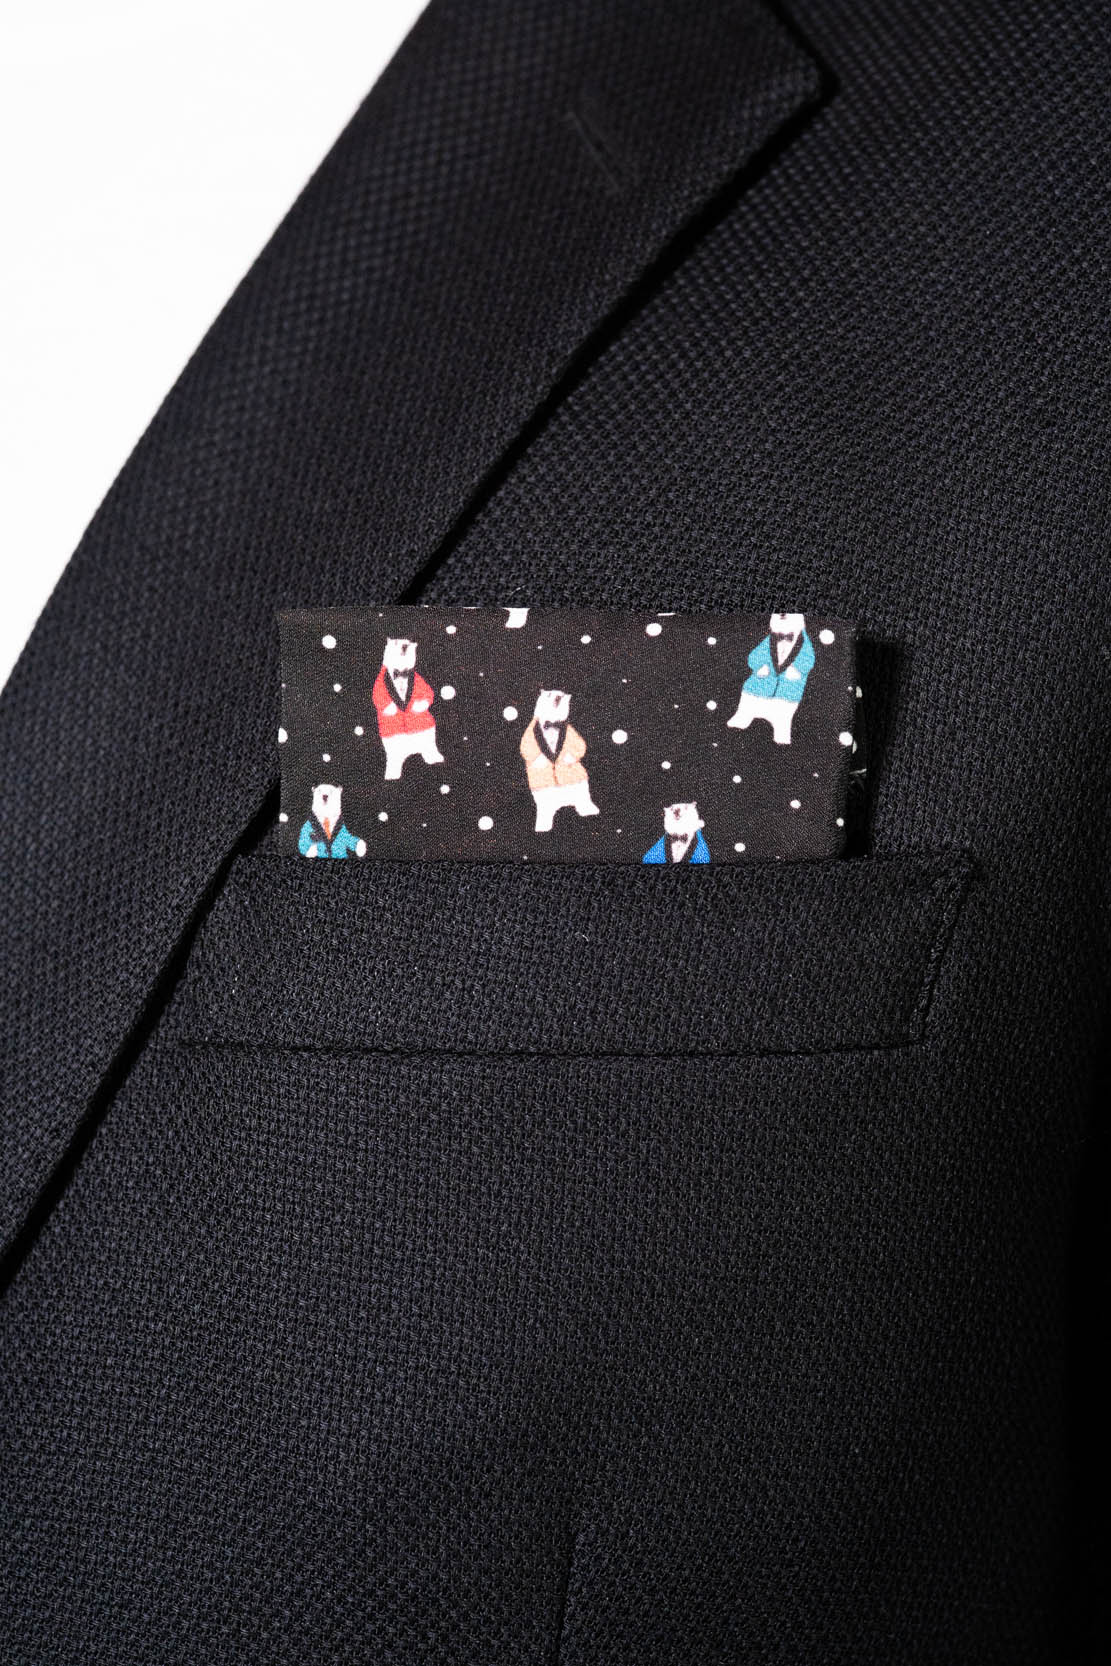 RARE CUT's BEAR CUT Pocket Square Worn in a Suit Jacket